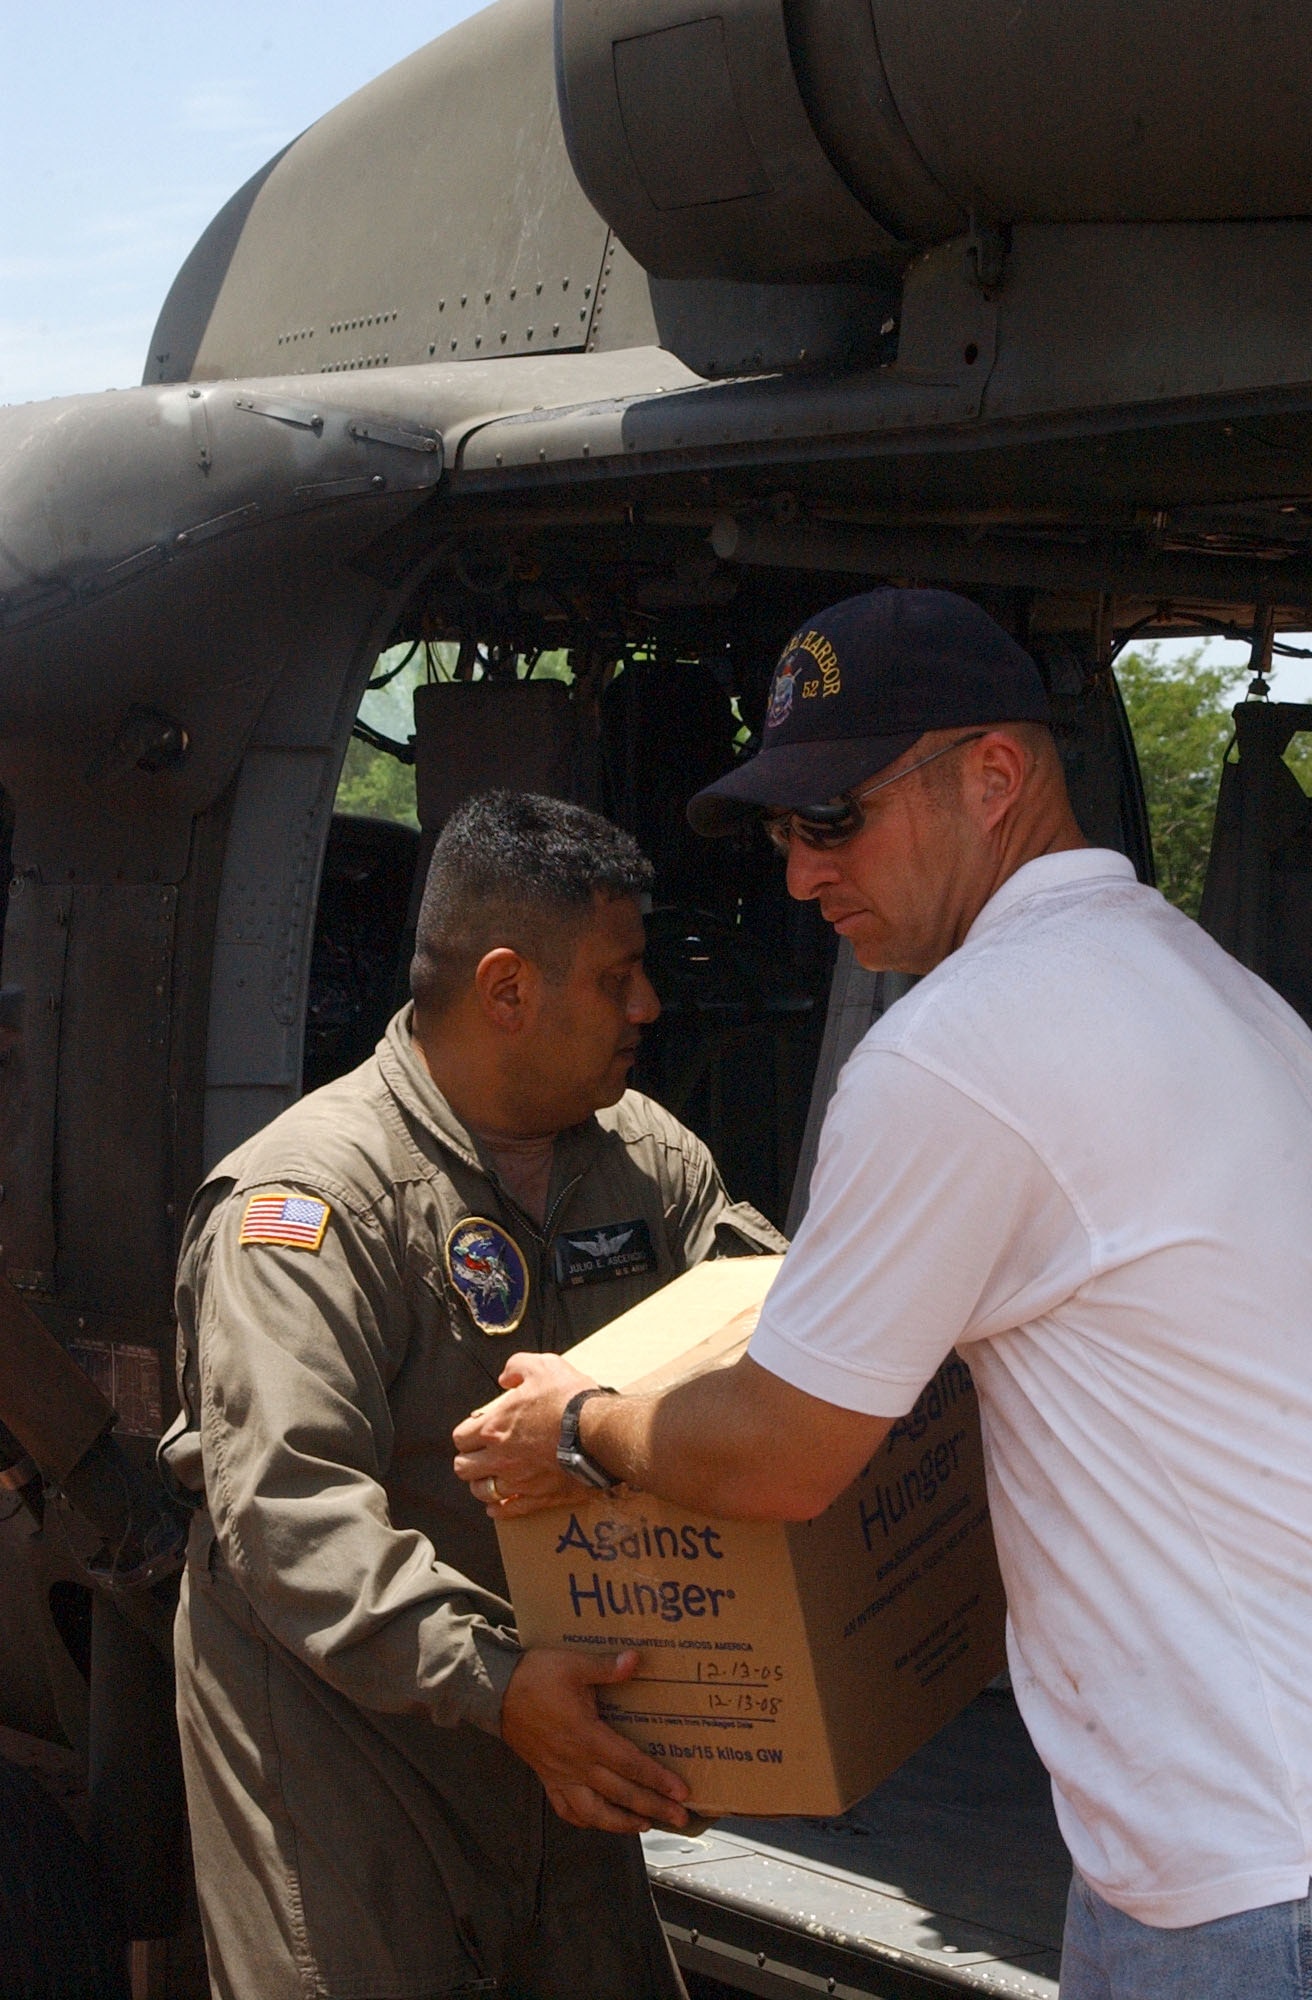 Navy Chaplain (Lt.) Dennis Wheeler, right, from the USS Pearl Harbor hands Army Sgt. First Class Julio Ascencio, a crew chief with the 1st Battalion 228th Aviation Regiment at Soto Cano Air Base, Honduras a box of humanitarian supplies to load into a UH-60 Black Hawk. The supplies were transported to villiages in southern Honduras as part of Project Handclasp, a partnership between the Navy and corporations, public service organizations, non-government organizations and individuals throughout the United States to provide humanitarian assistance overseas. Members of Joint Task Force-Bravo assisted the Navy with logisitics, ground and air support. Air Force photo by Senior Airman Shaun Emery.                                                     